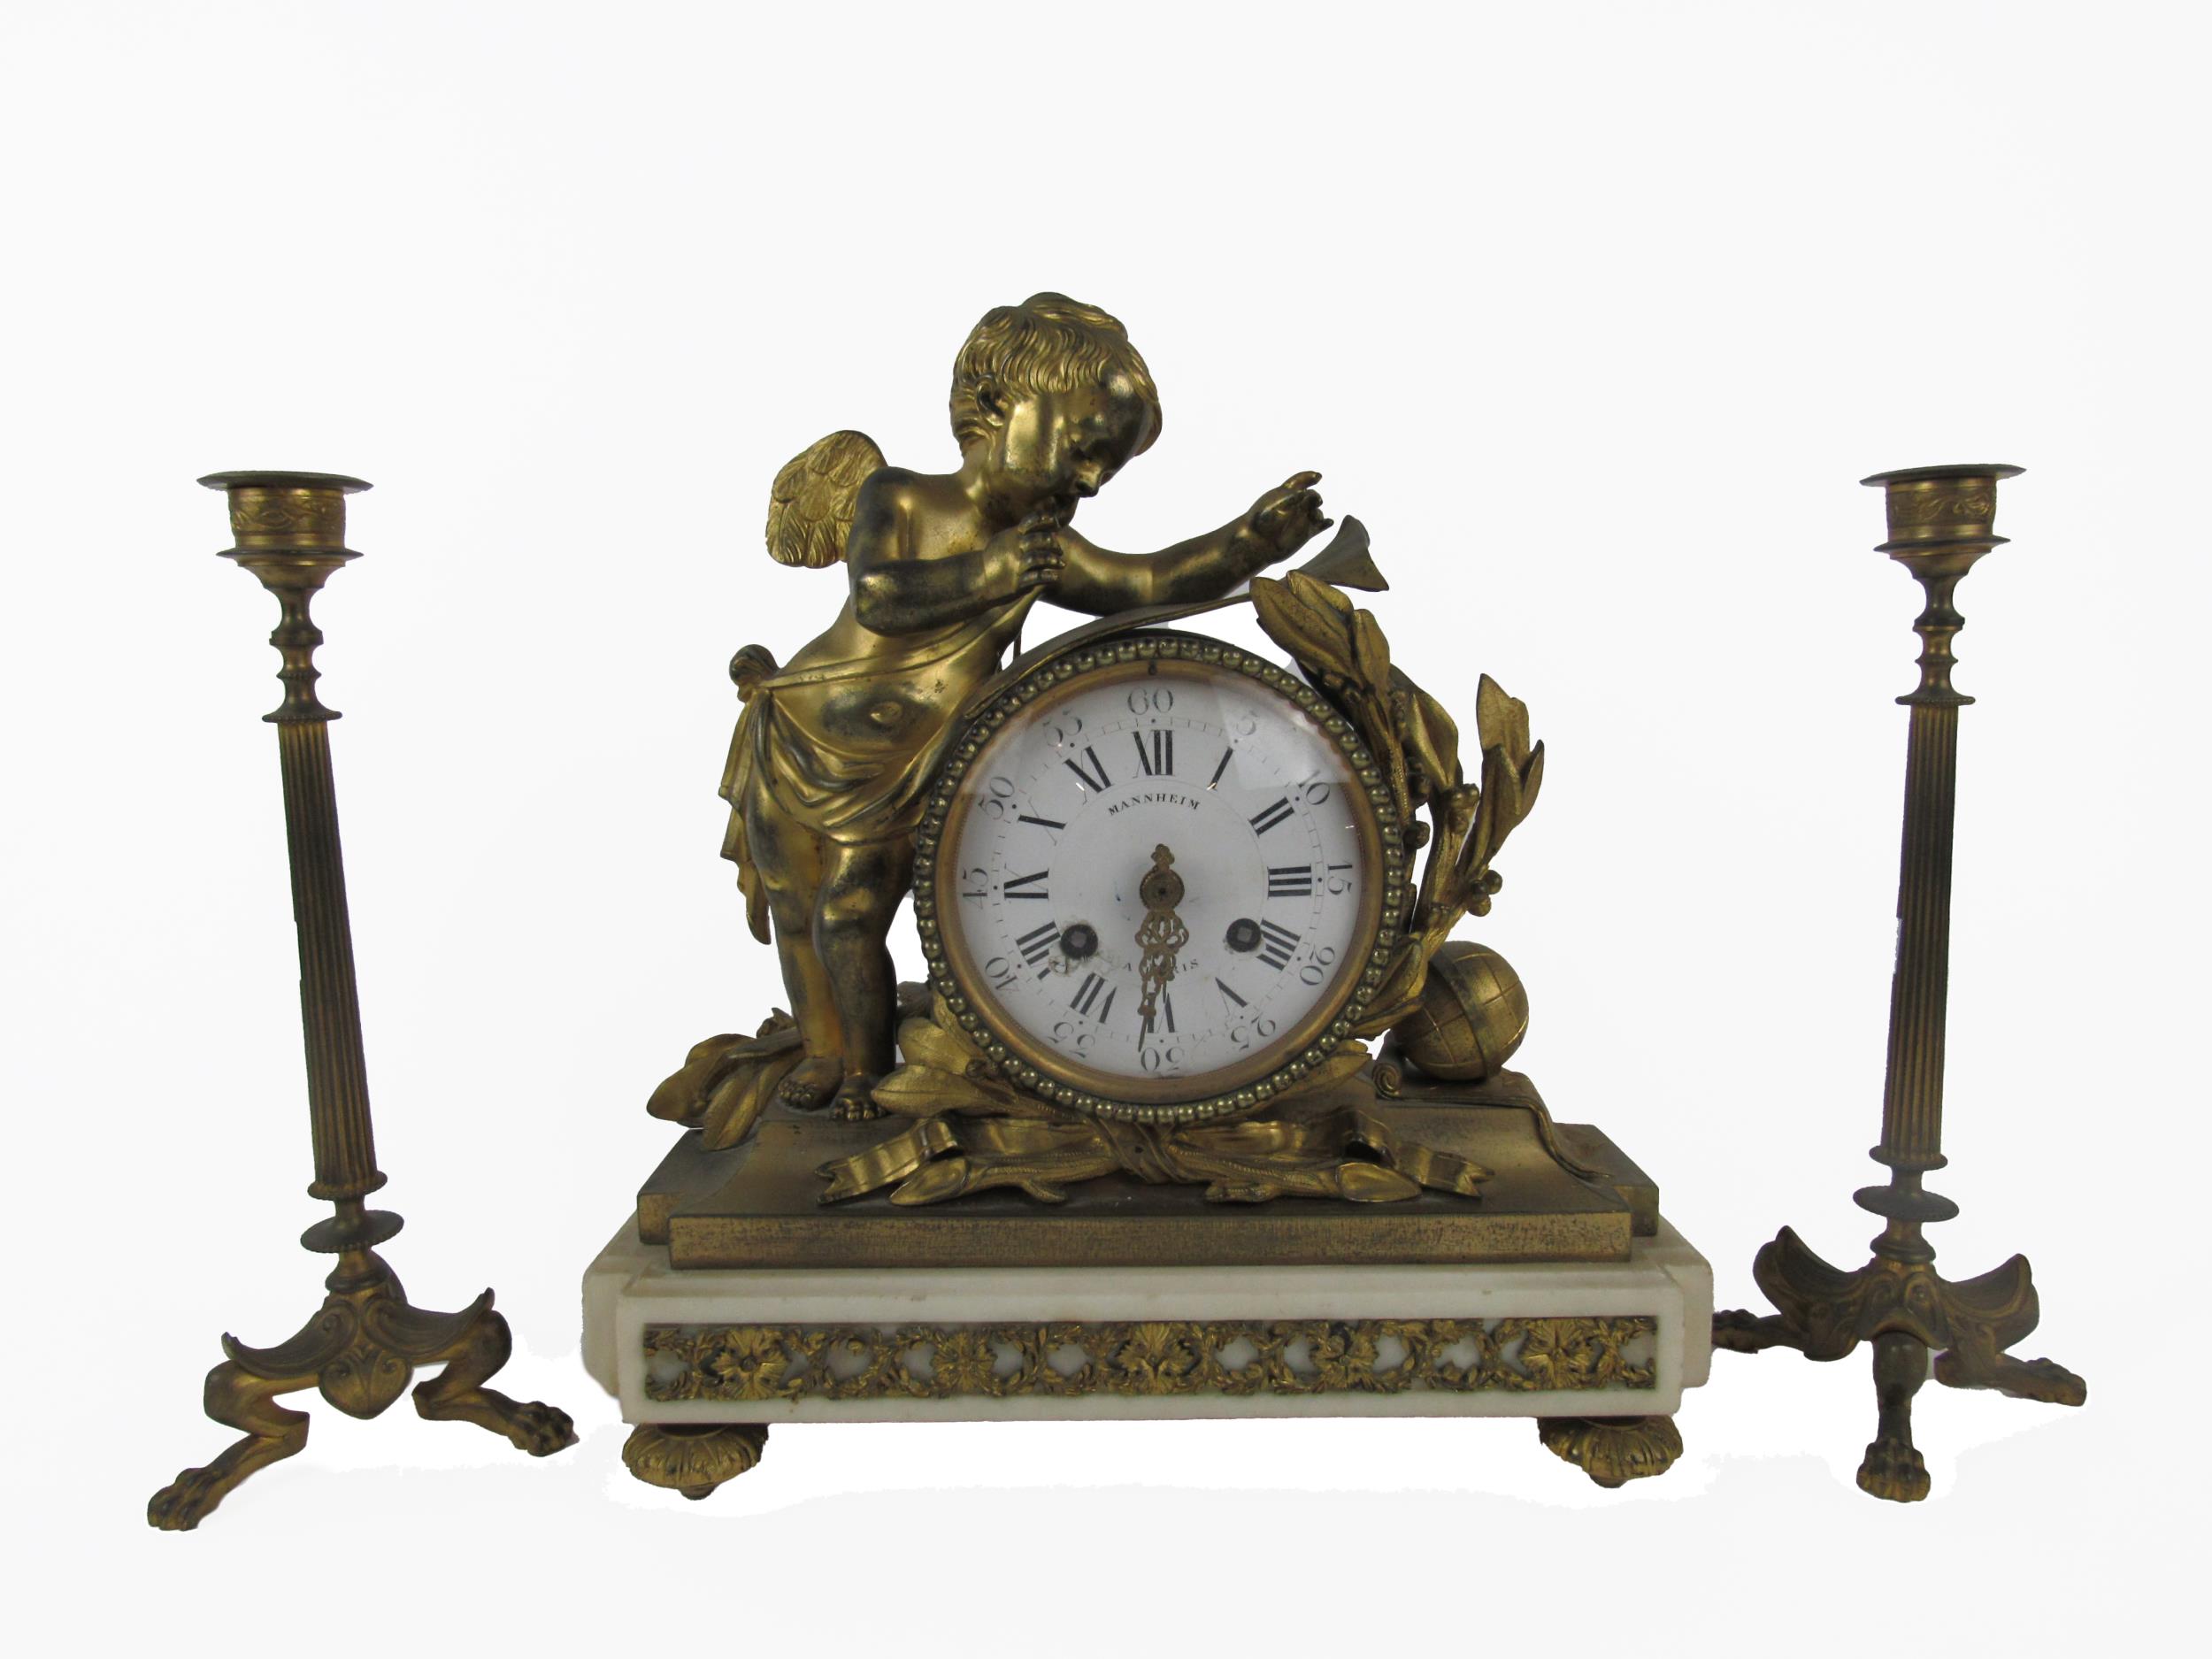 A 19th Century ormolu French Mantle Clock, by Mannheim, Paris, the circular dial with Roman and